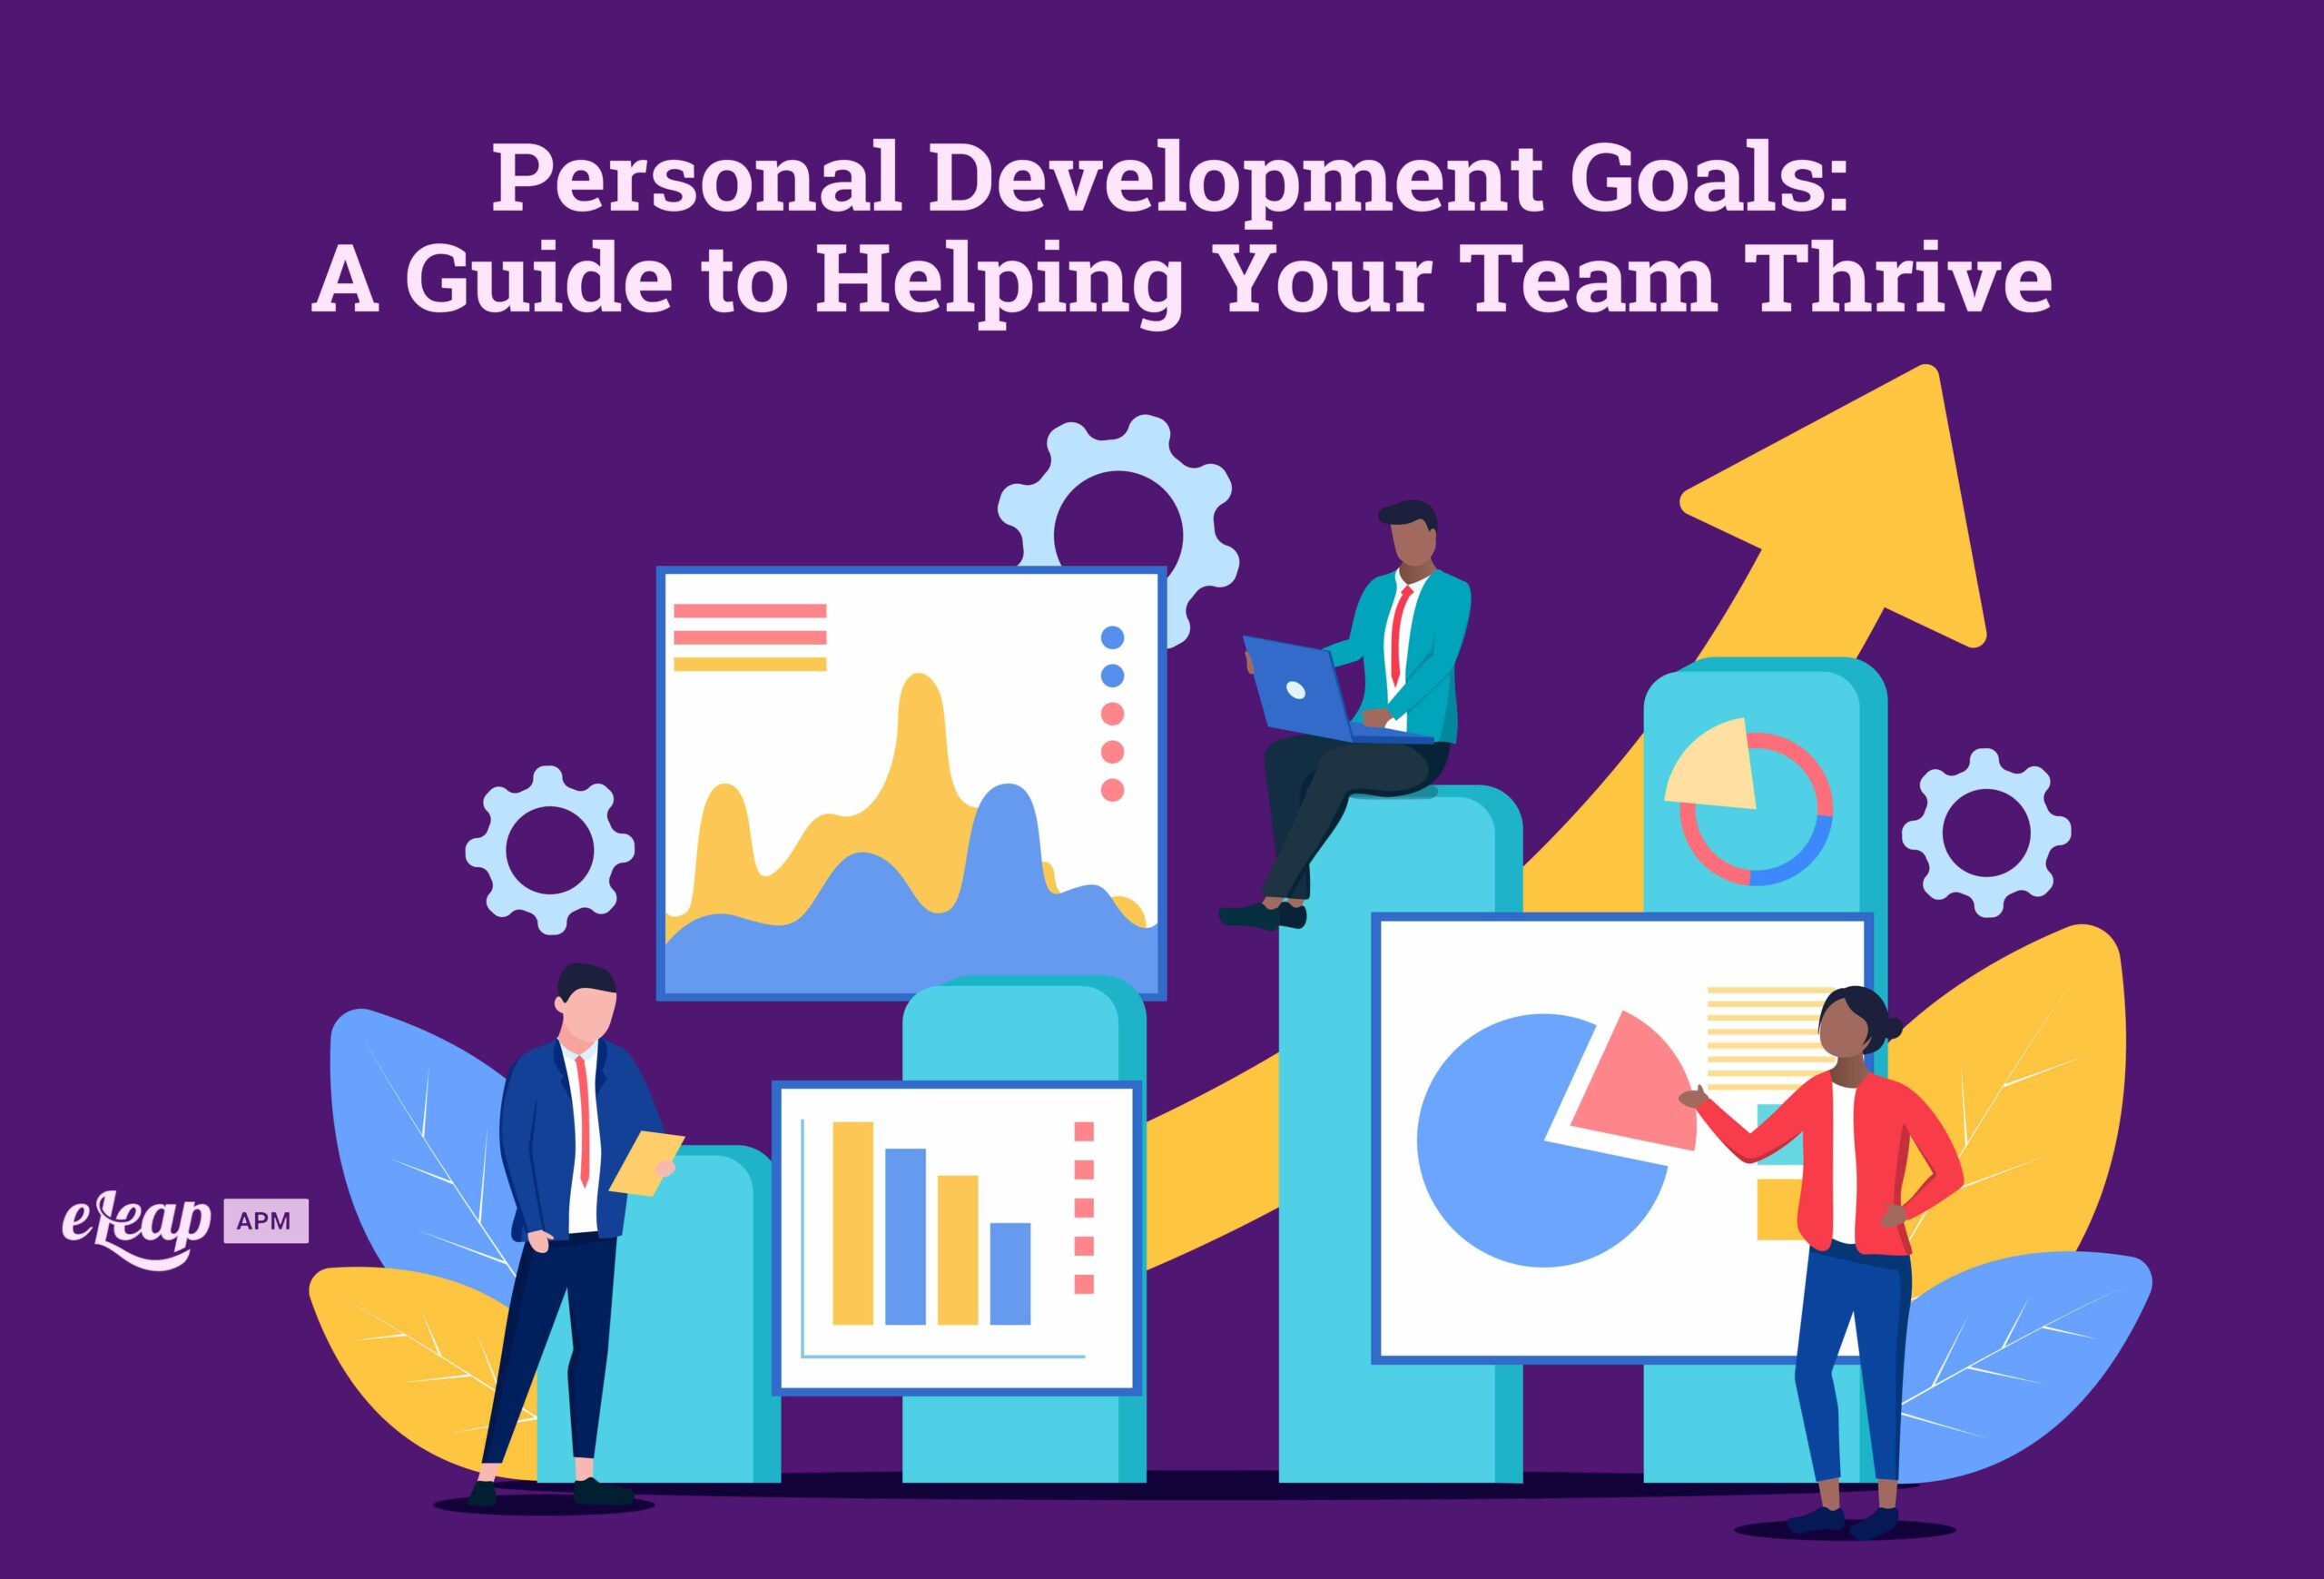 Personal Development Goals: A Guide to Helping Your Team Thrive